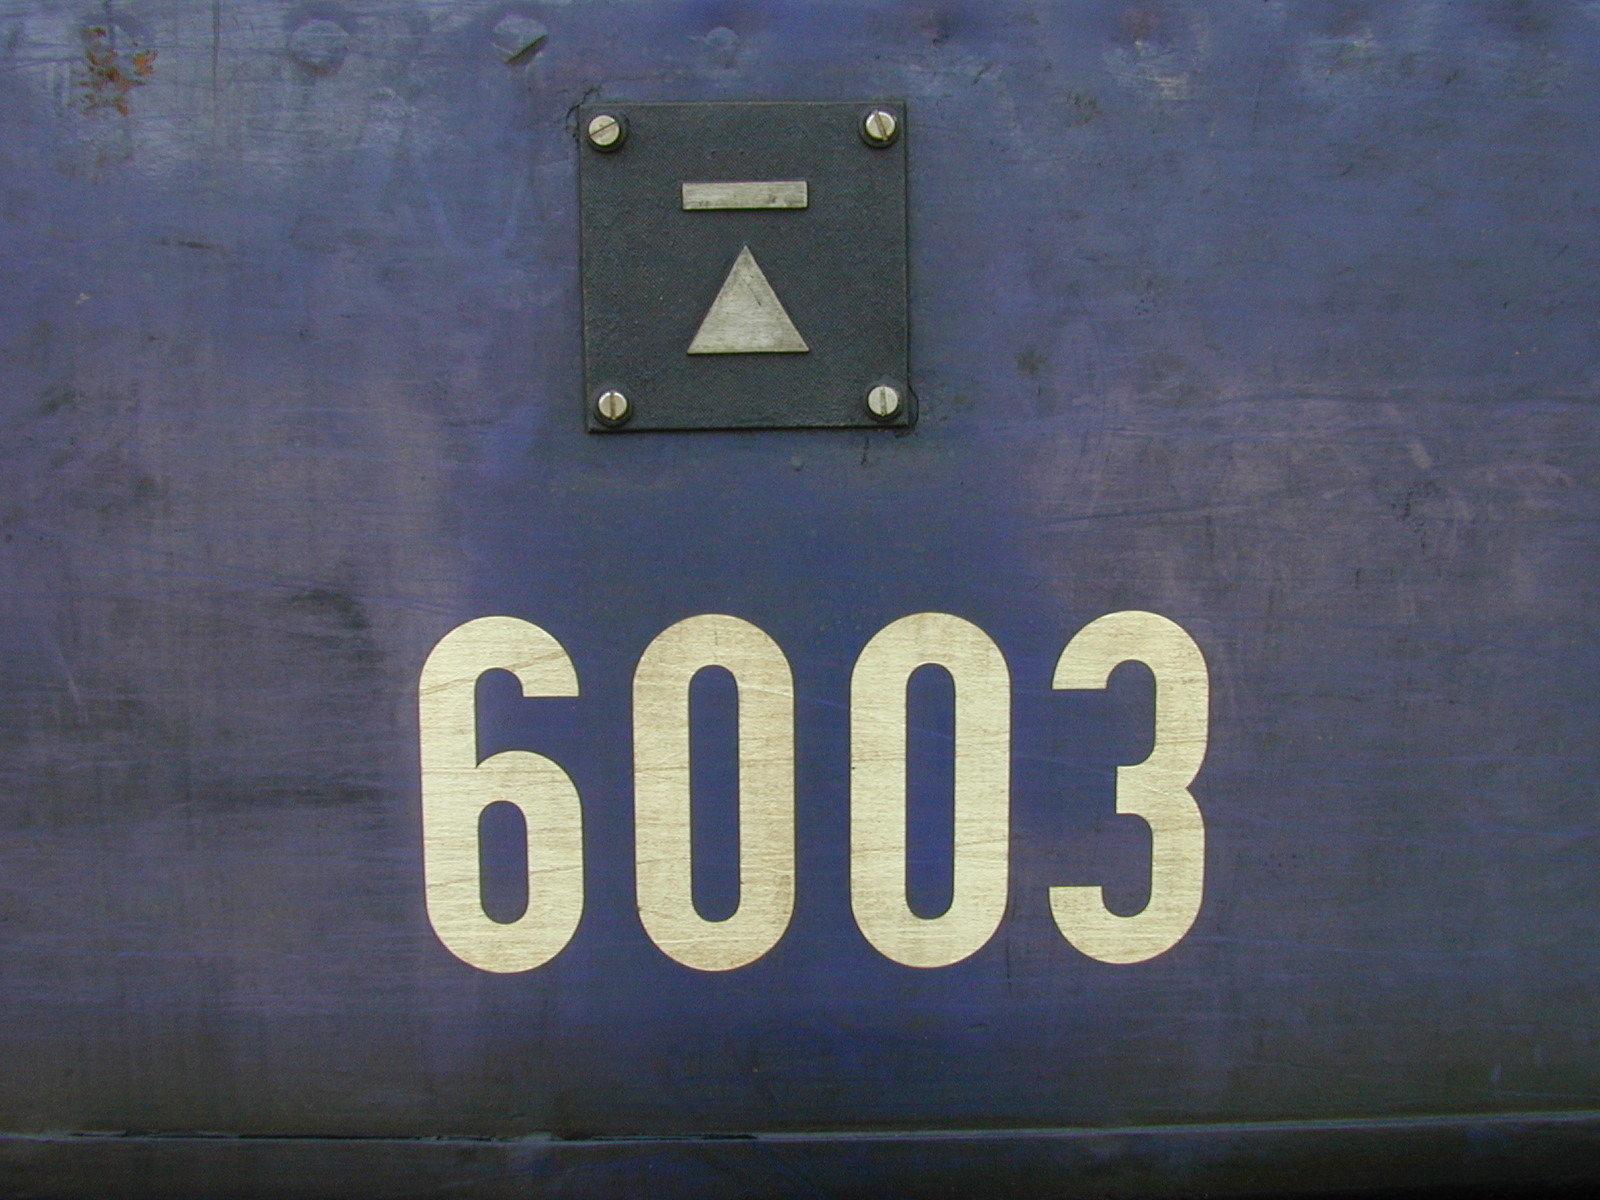 typo typography modern numbers freight walls metal textures signs arrow triangle screwed plate dirty 6003 6 0 3 003 03 60 600 blue images